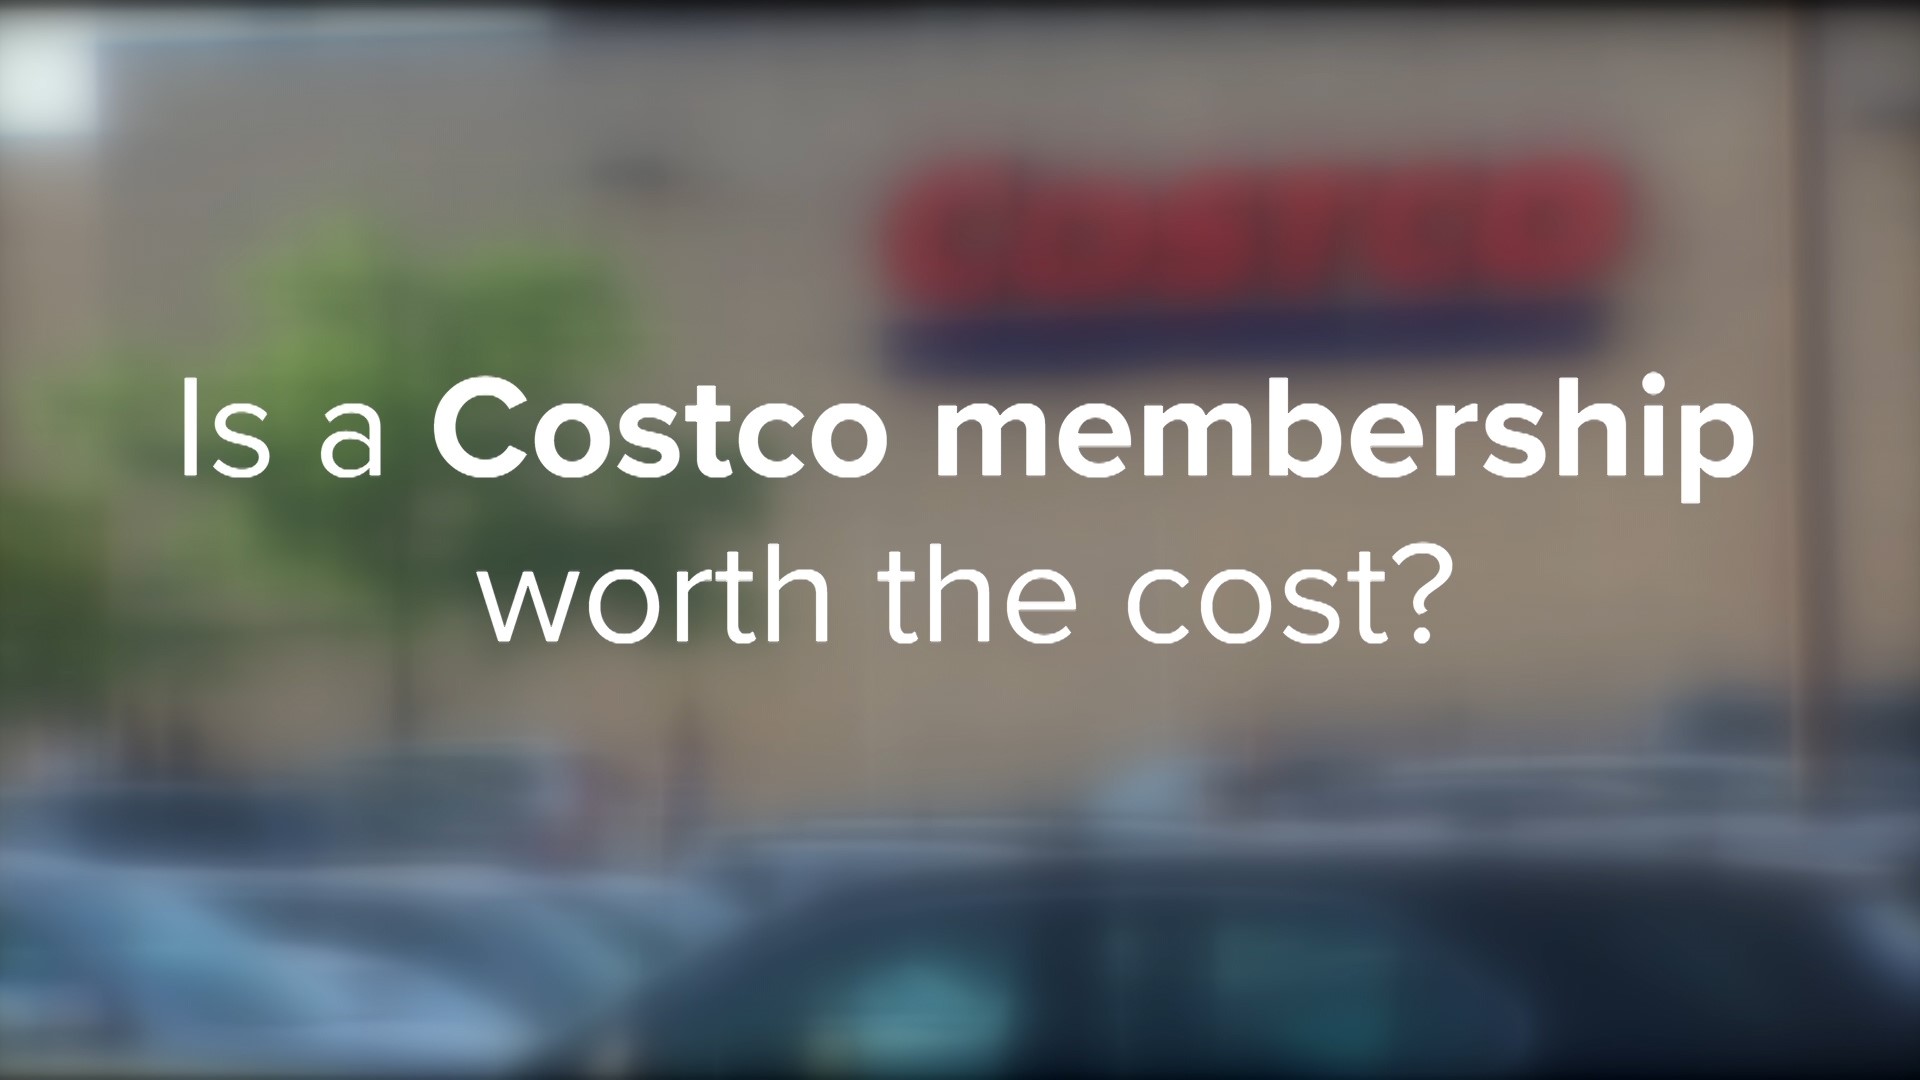 You want to know if a Costco membership is worth the cost. We can show you an easy way to earn back the $60 cost of membership and save on high gas prices.